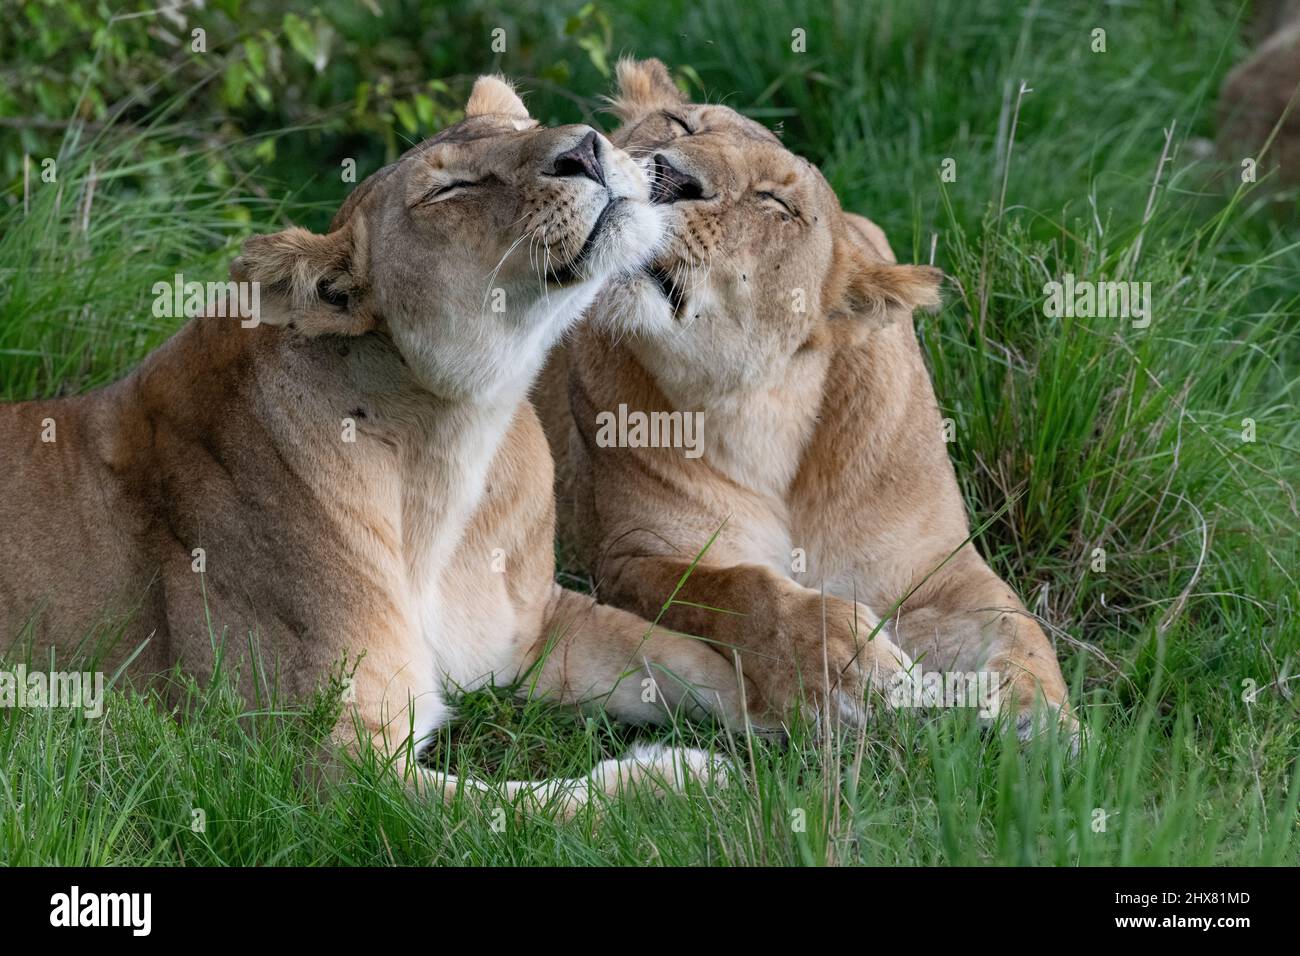 two lionesses bonding together Stock Photo